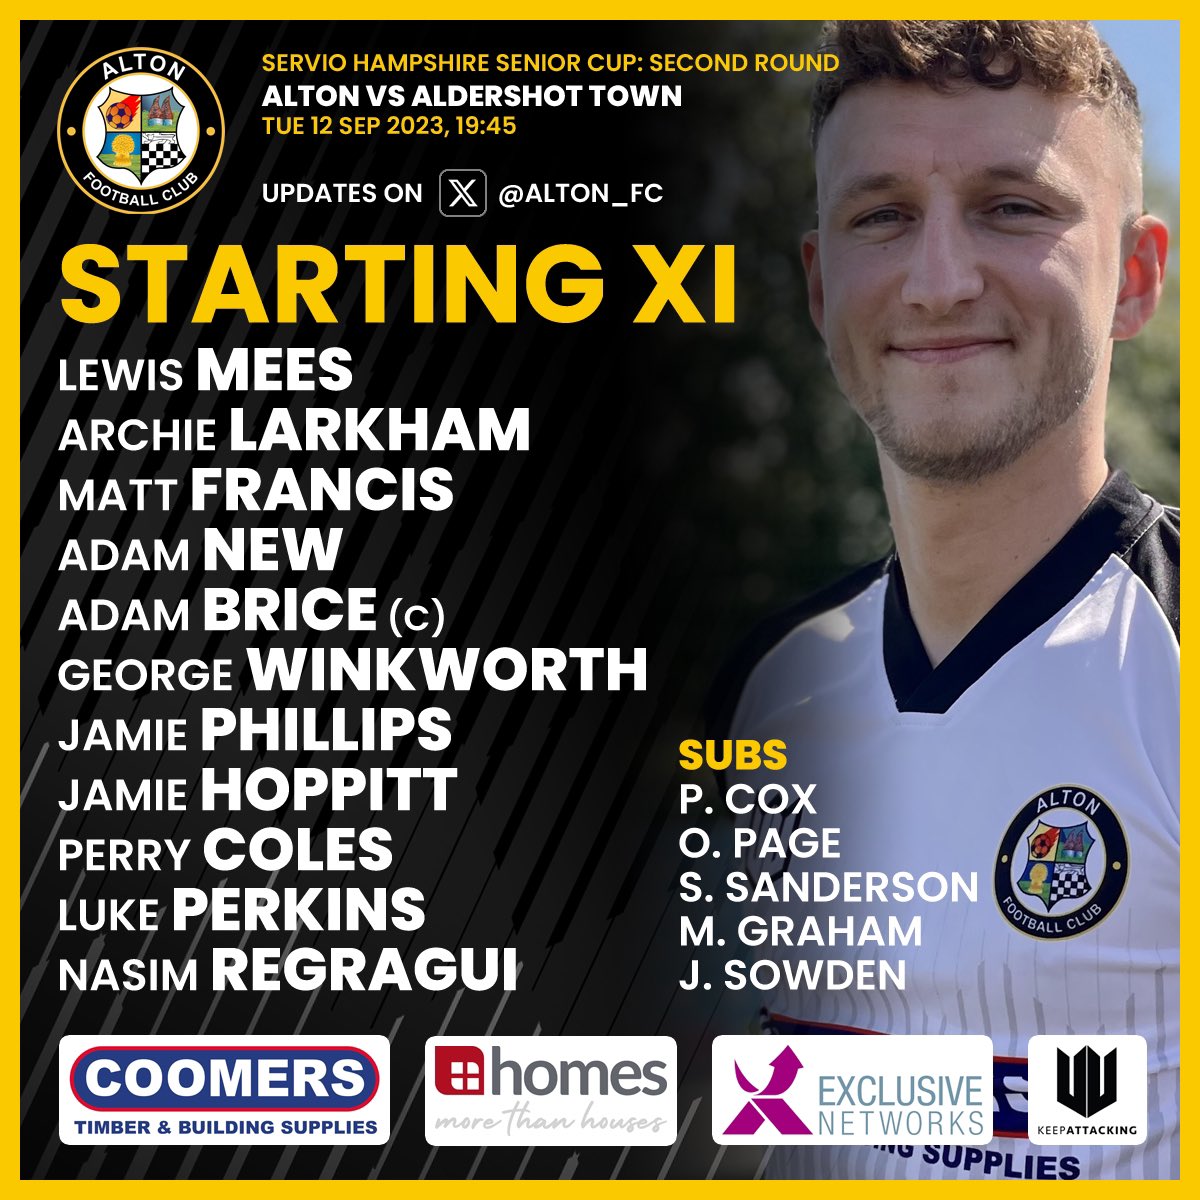 🏆 Servio @HampshireFA Senior Cup 🚨 𝐓𝐄𝐀𝐌𝐒𝐇𝐄𝐄𝐓 🚨 ⚪️⚫️ Up the Brewers! @Coomersltd @HomesEstAgents @EXN_UK @keep__attacking